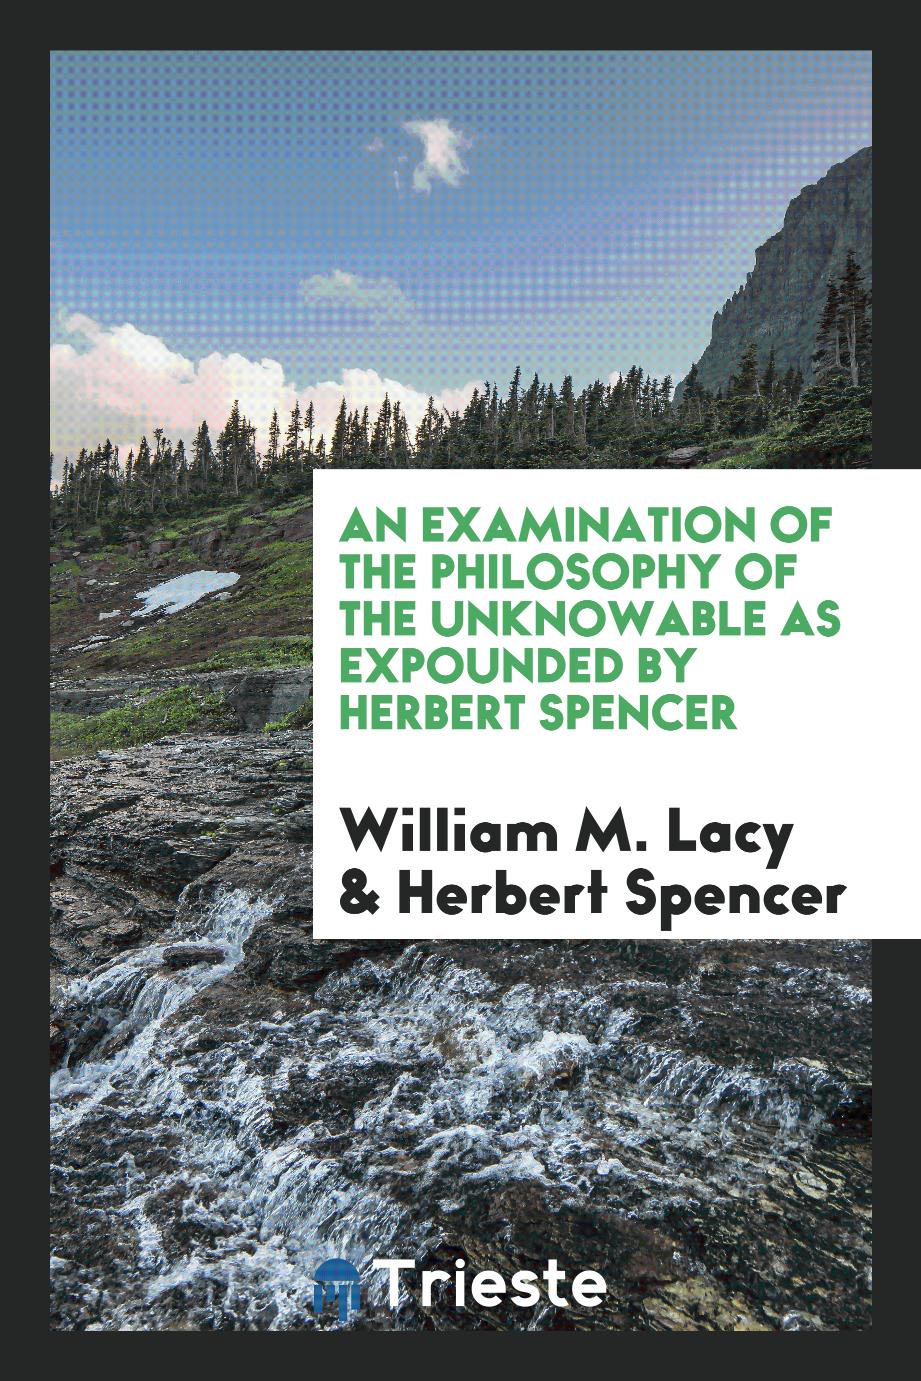 An Examination of the Philosophy of the Unknowable as Expounded by Herbert Spencer